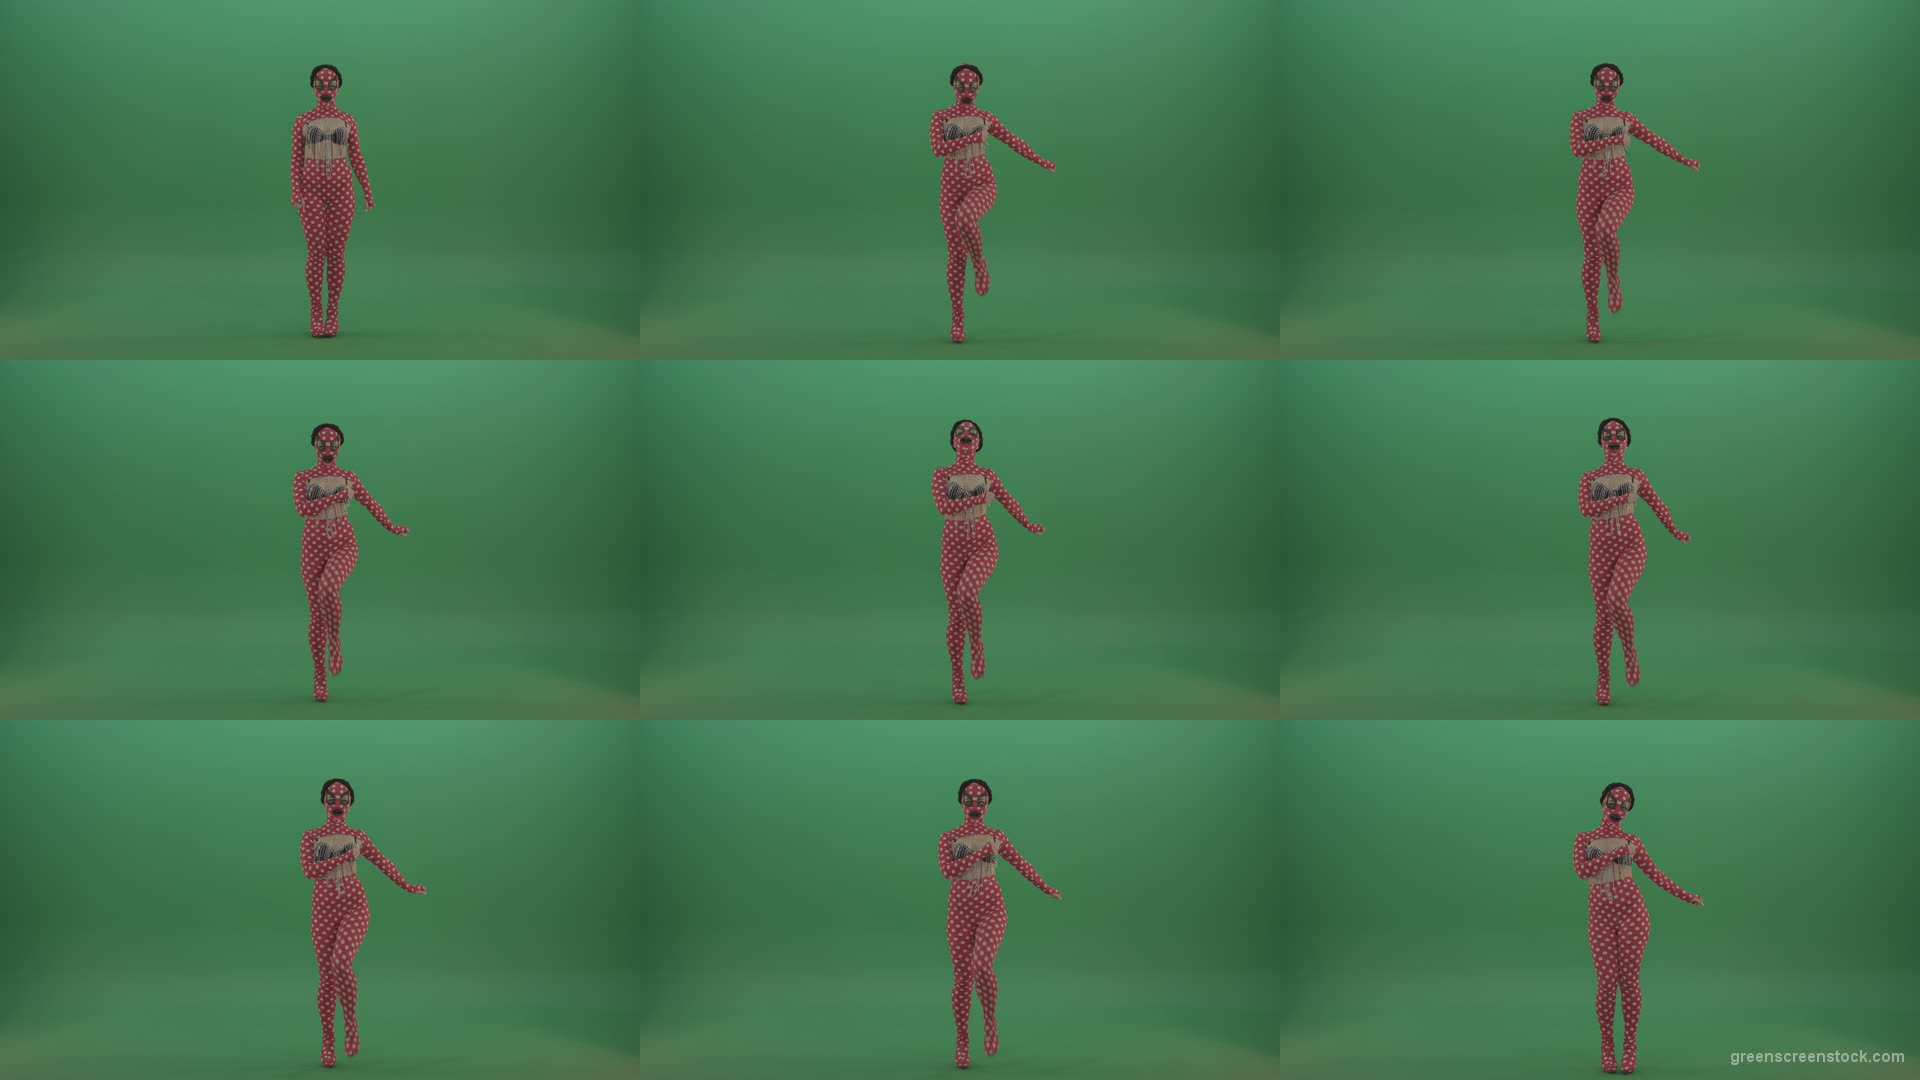 Beauty-red-dress-girl-march-in-front-view-isolated-on-green-screen Green Screen Stock